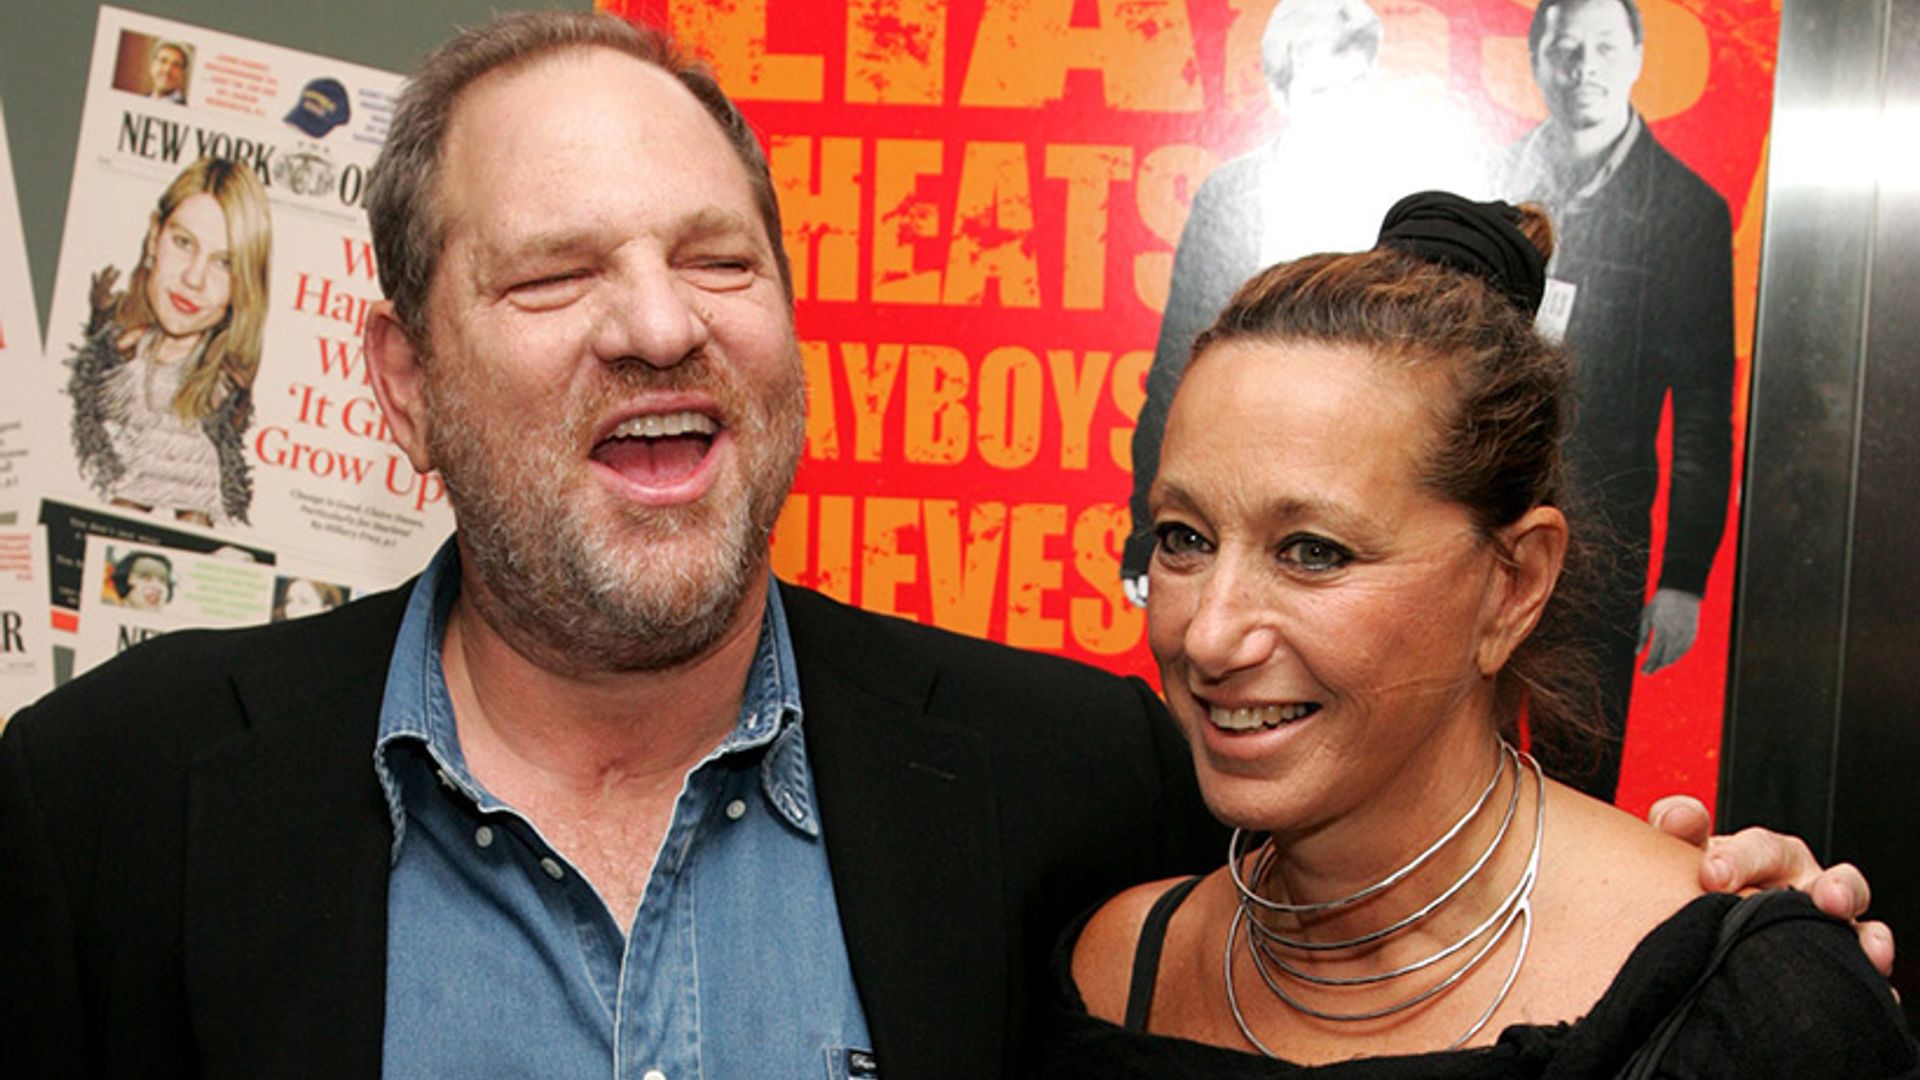 Donna Karan was 'confused' when initially quizzed about Harvey Weinstein